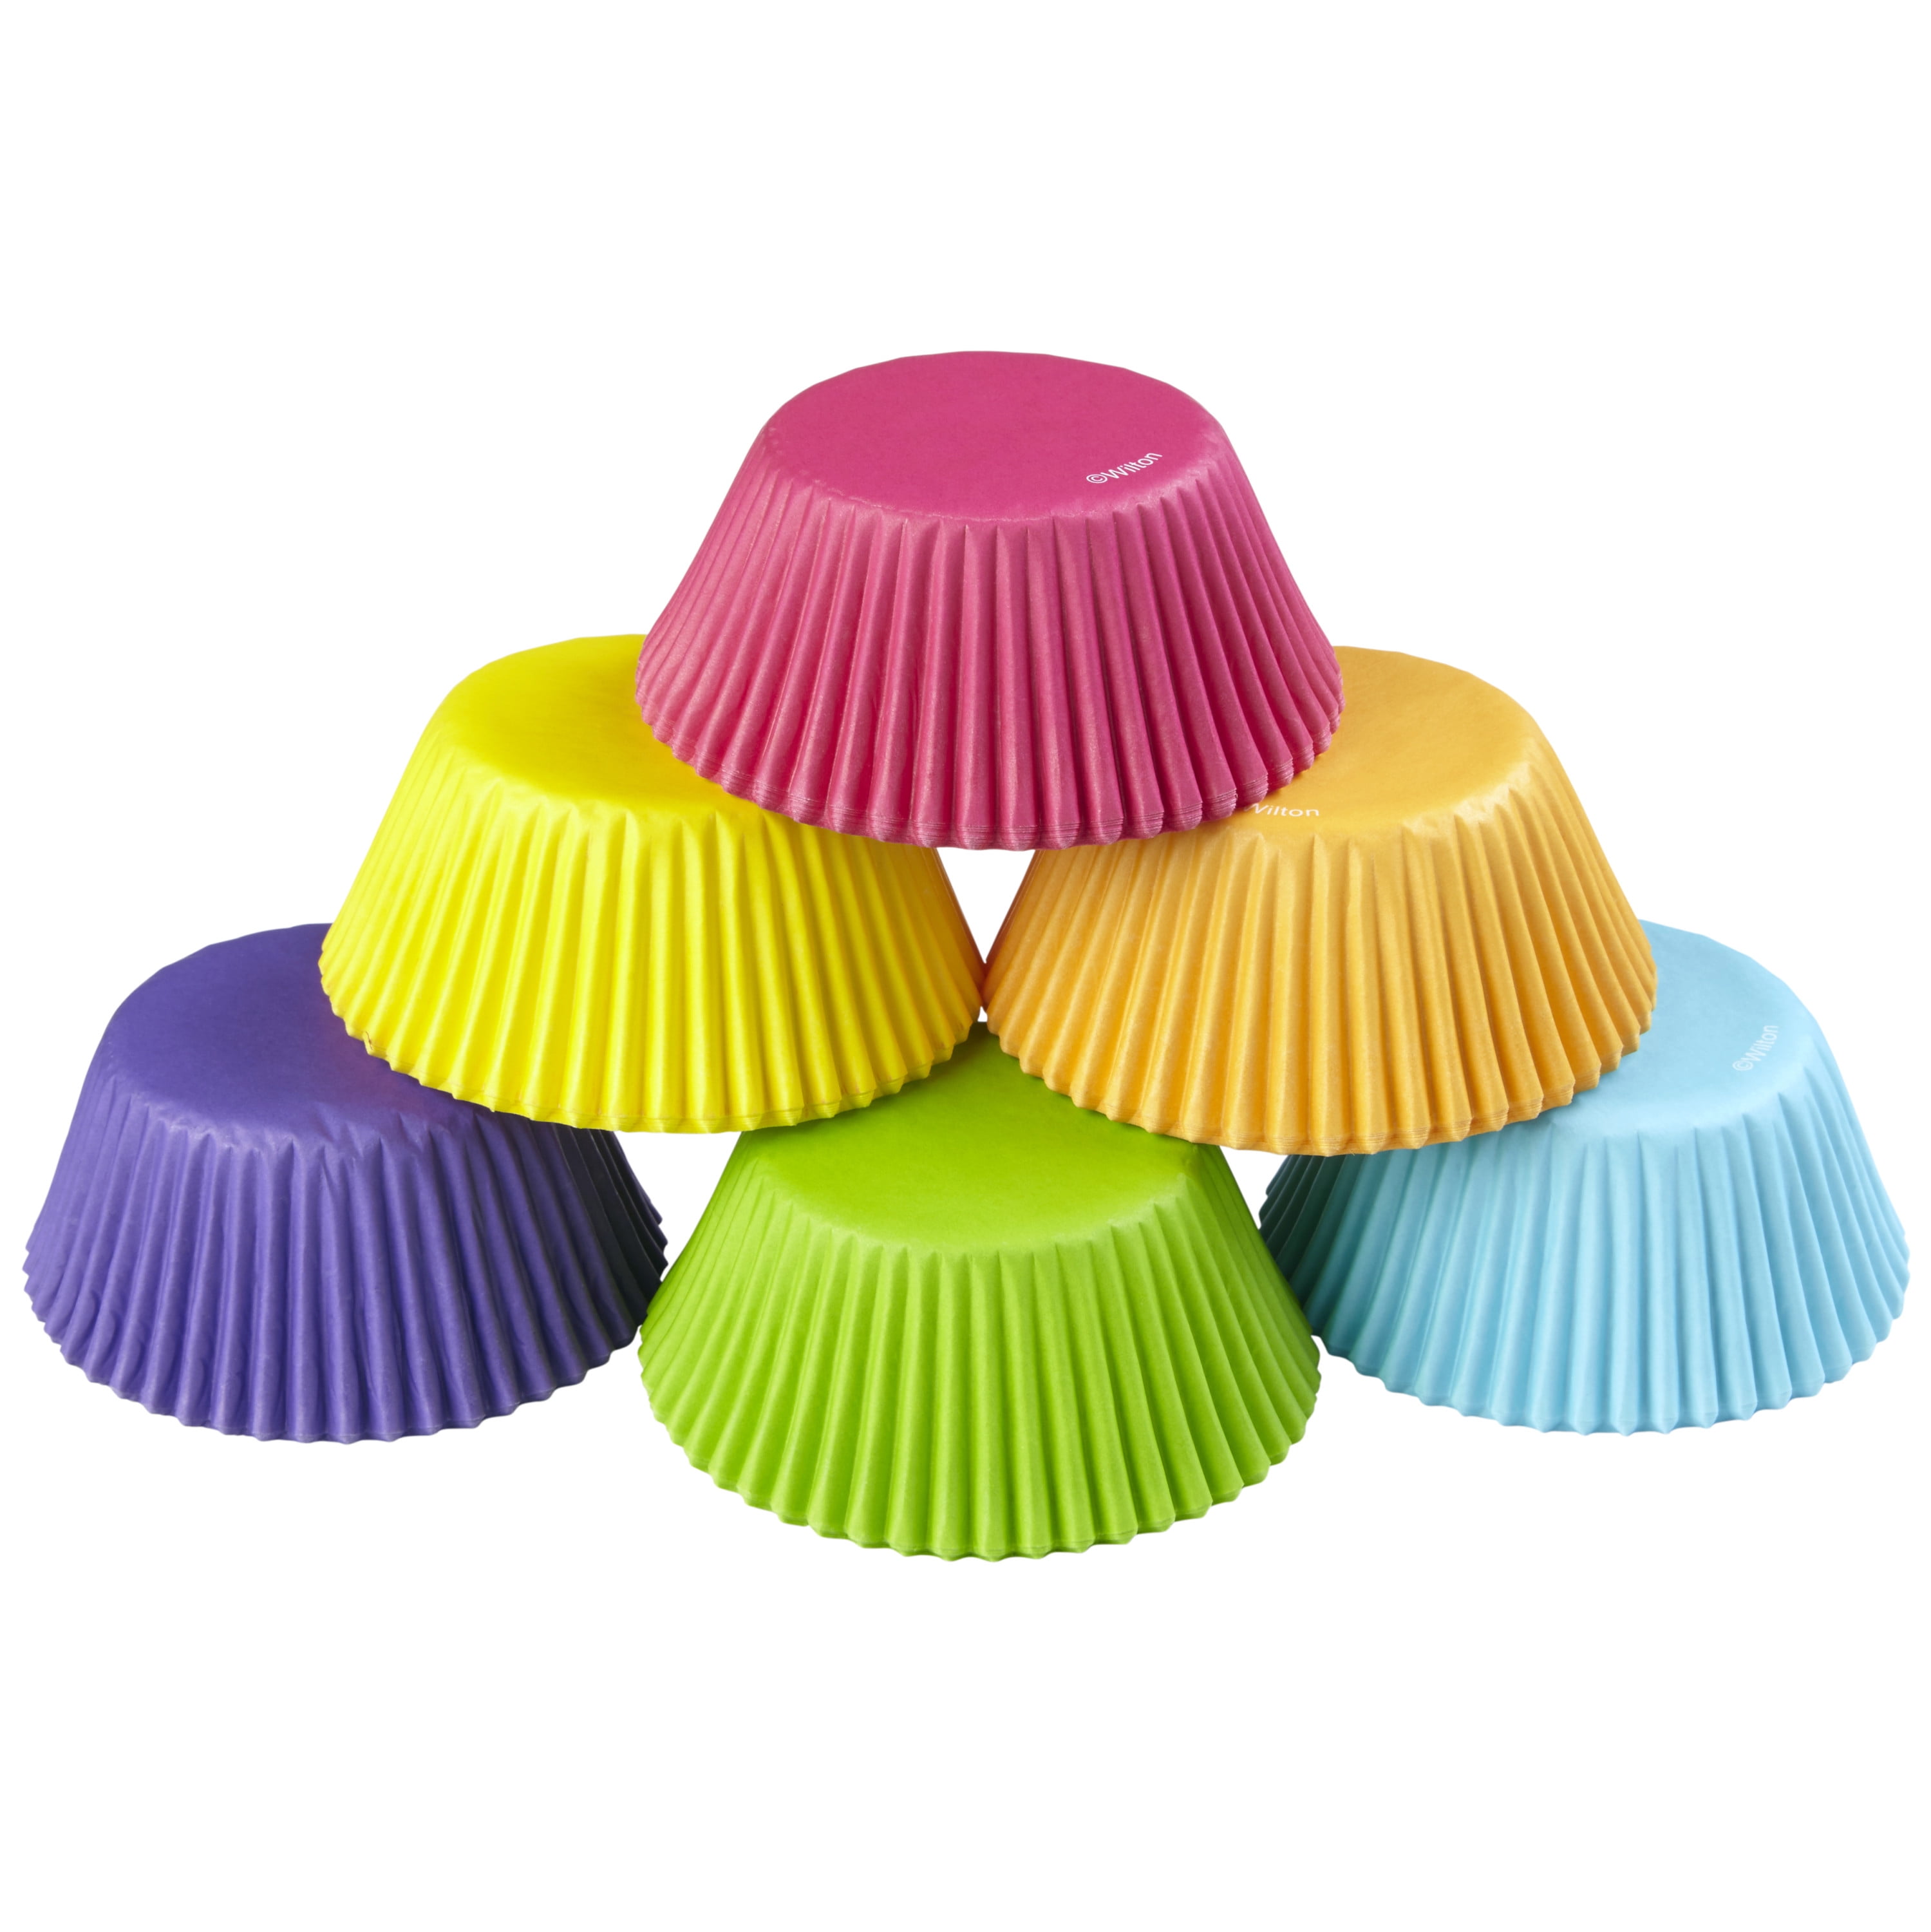 Details about   Rainbow Cupcake Liners-4 Dozen-48 Standard Liners 